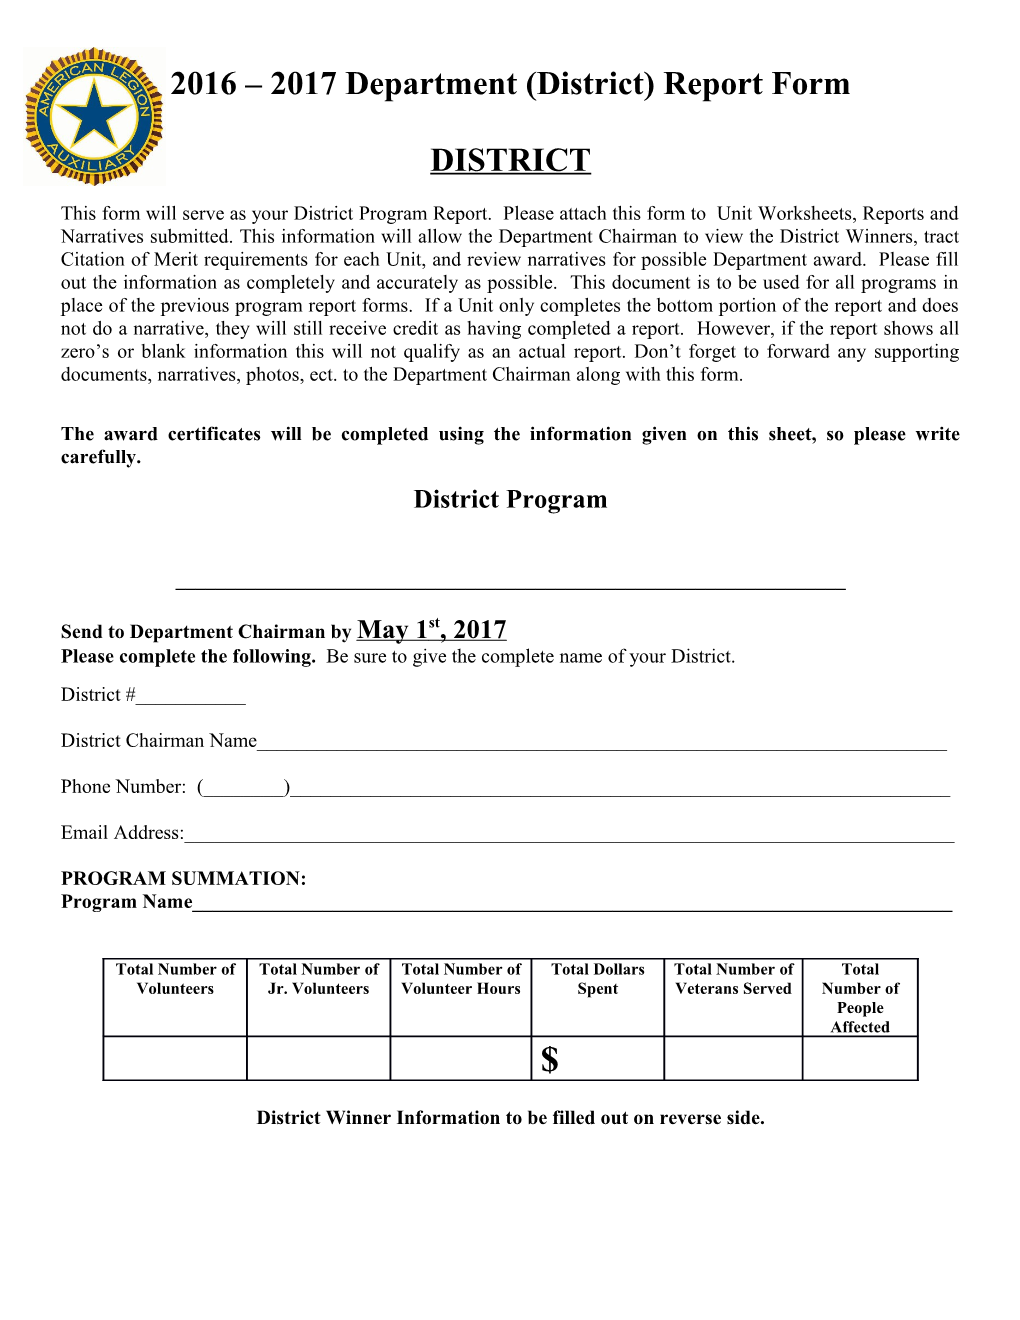 2016 2017Department (District)Report Form